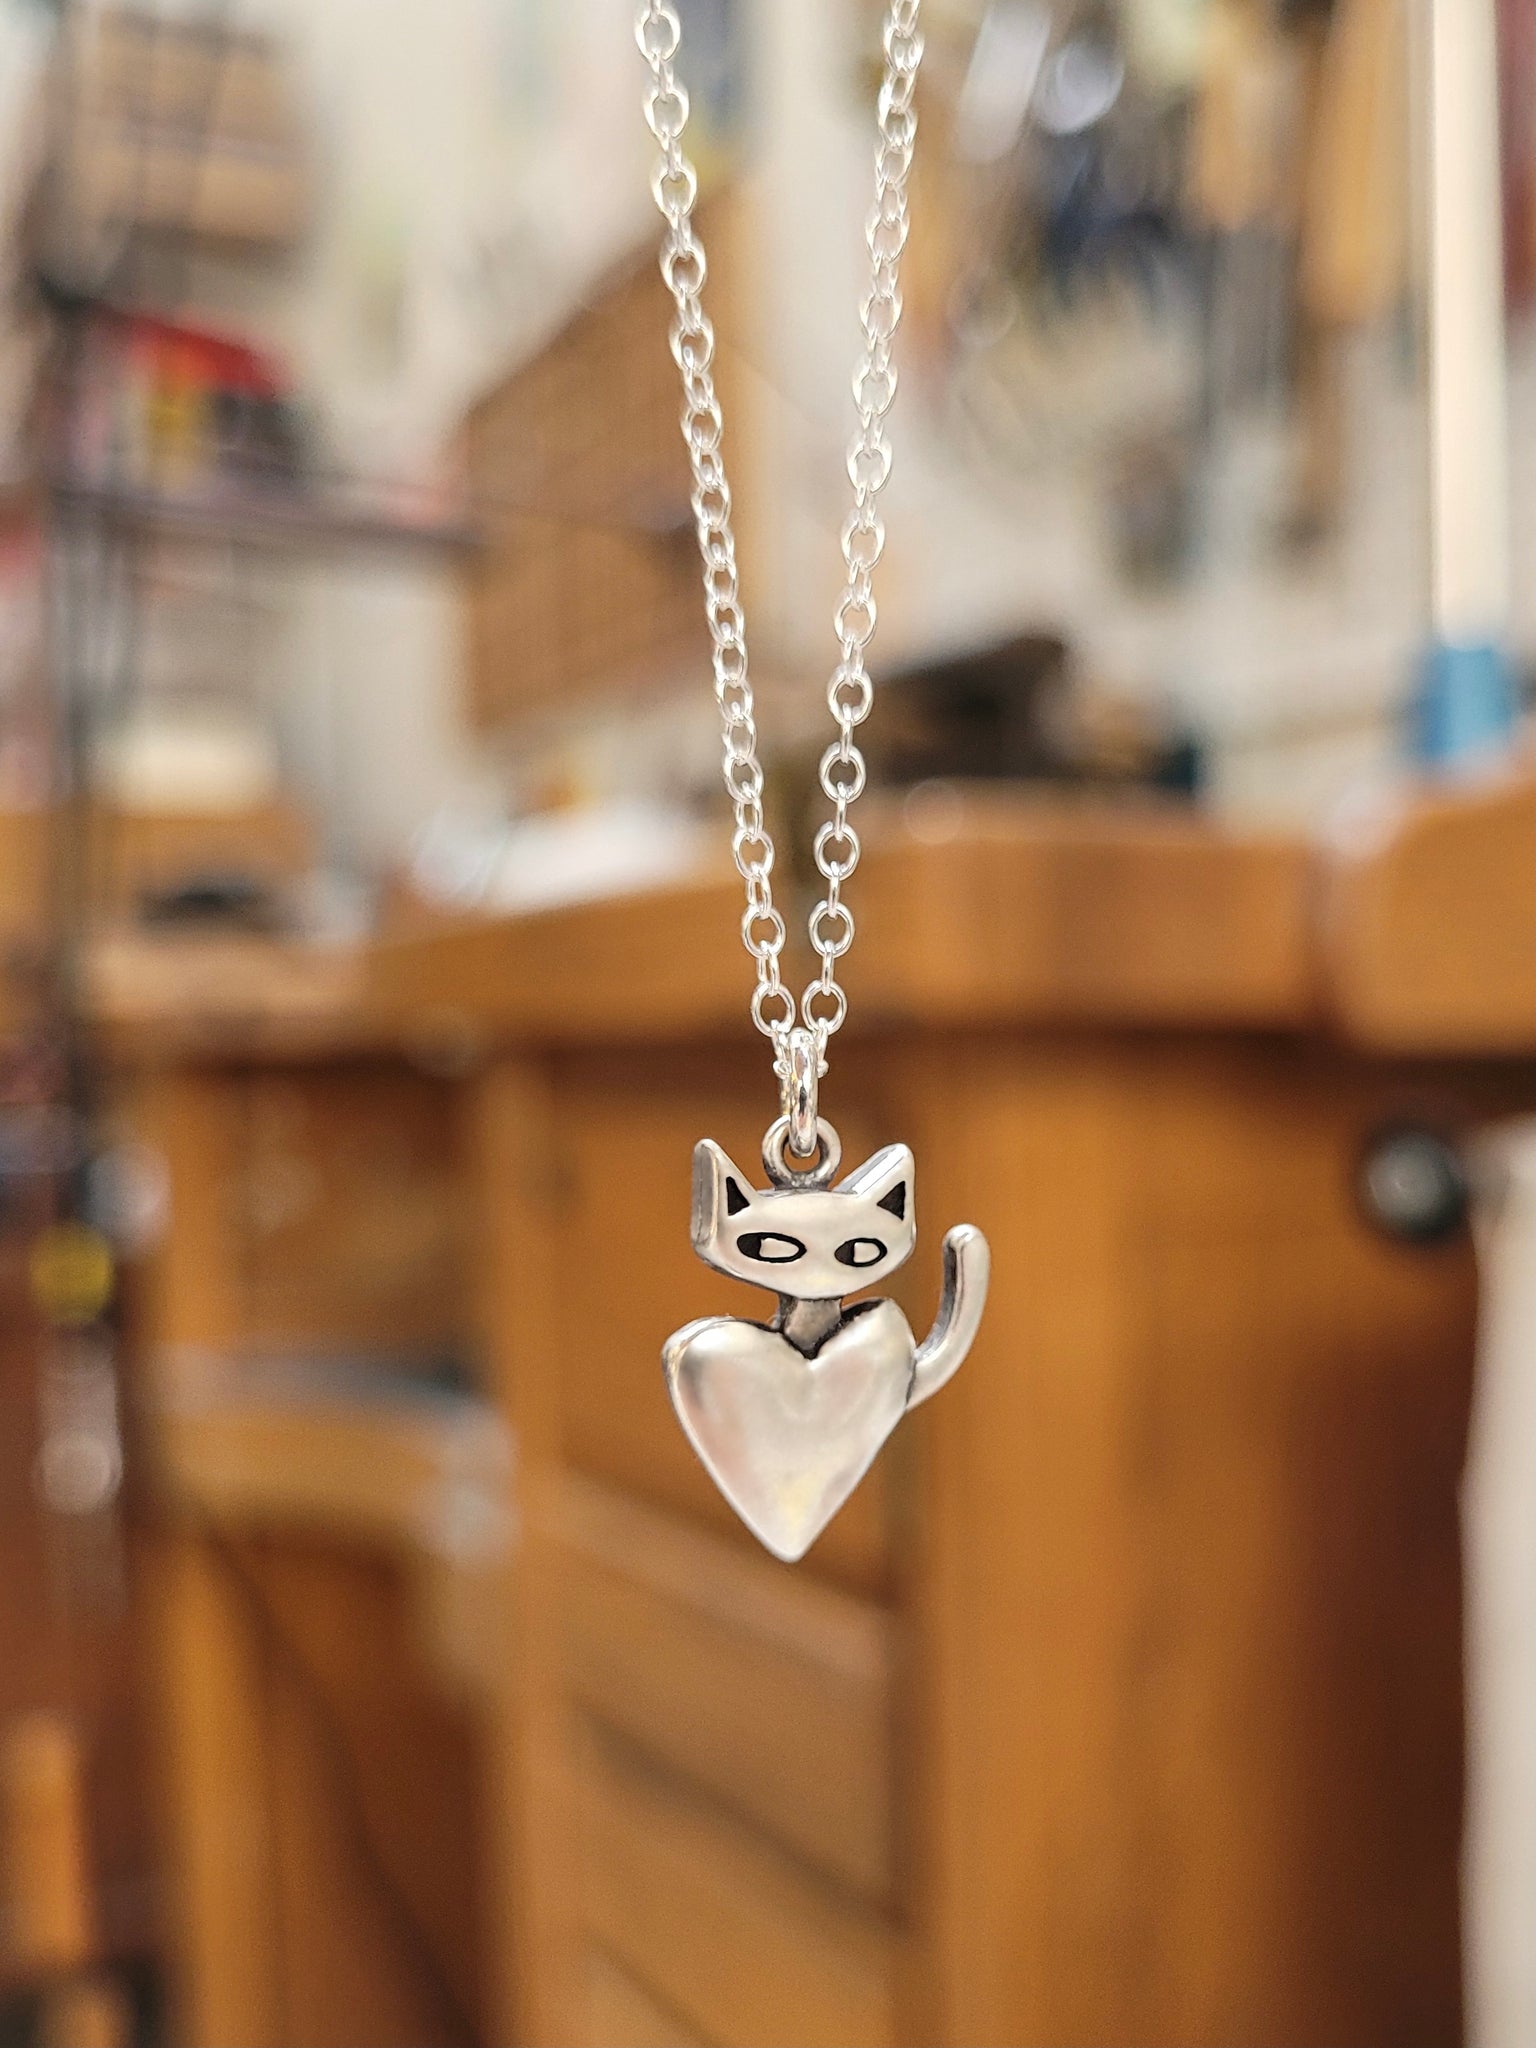 Cat Charm - Choose Your Sterling Silver Cat Charm to Add to Bracelet Cat Head